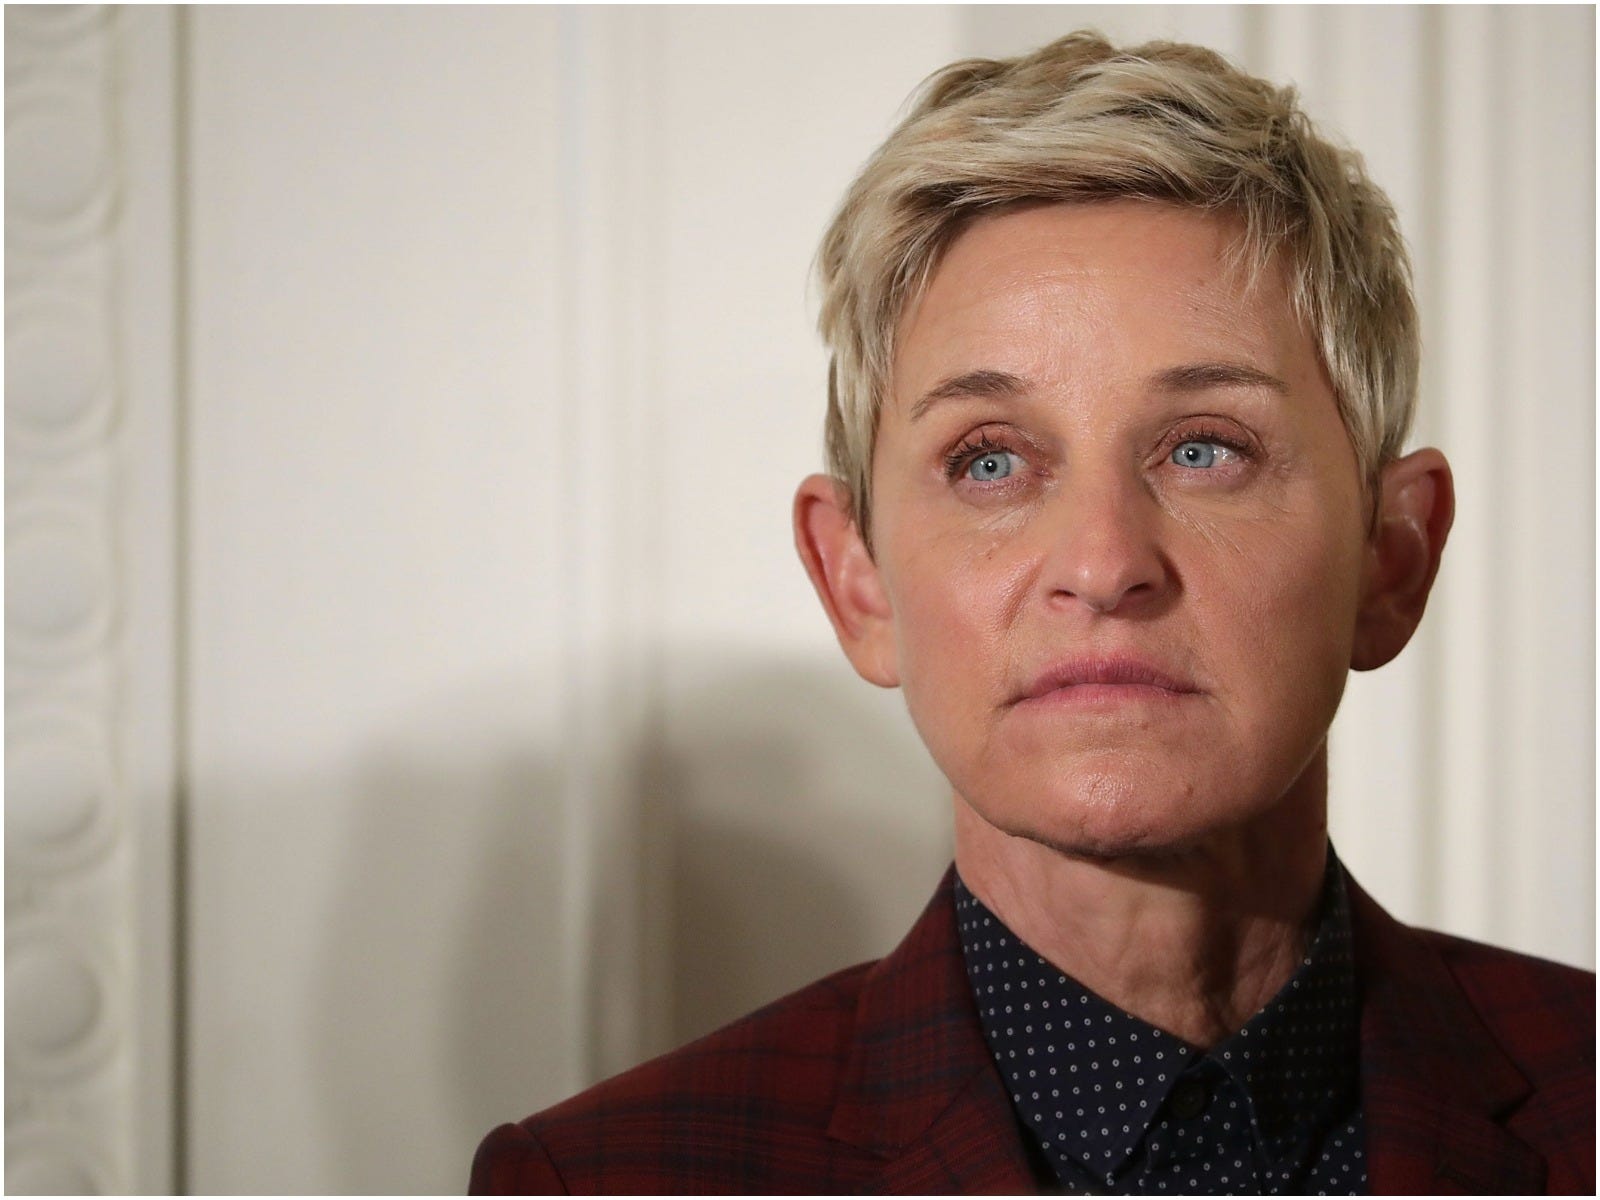 Ellen Degeneres Calls Toxic Workplace Allegations About Her Show Orchestrated And Coordinated